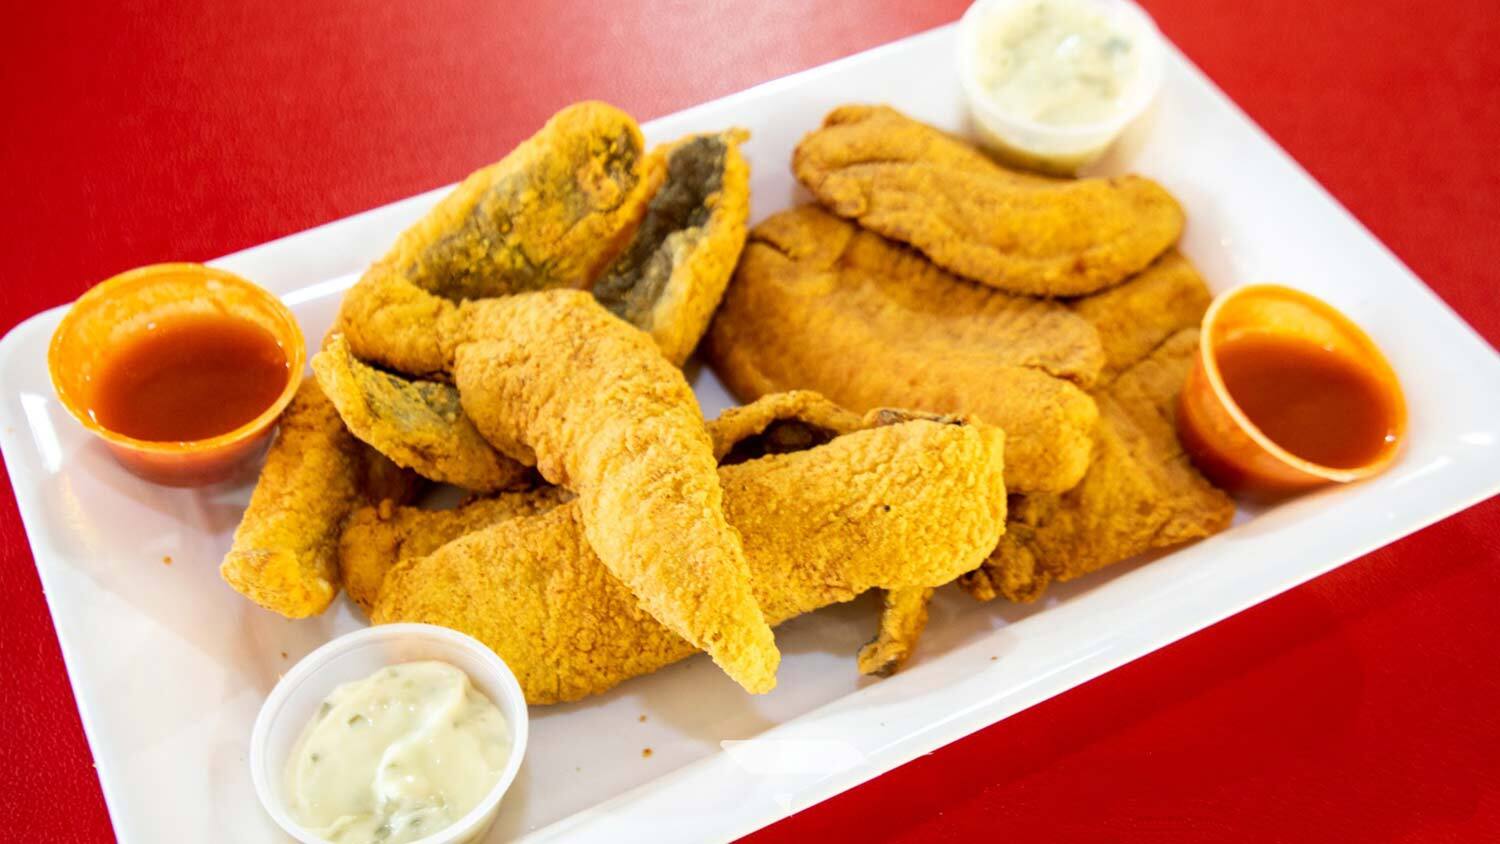 A platter of fried fish served with dipping sauces.